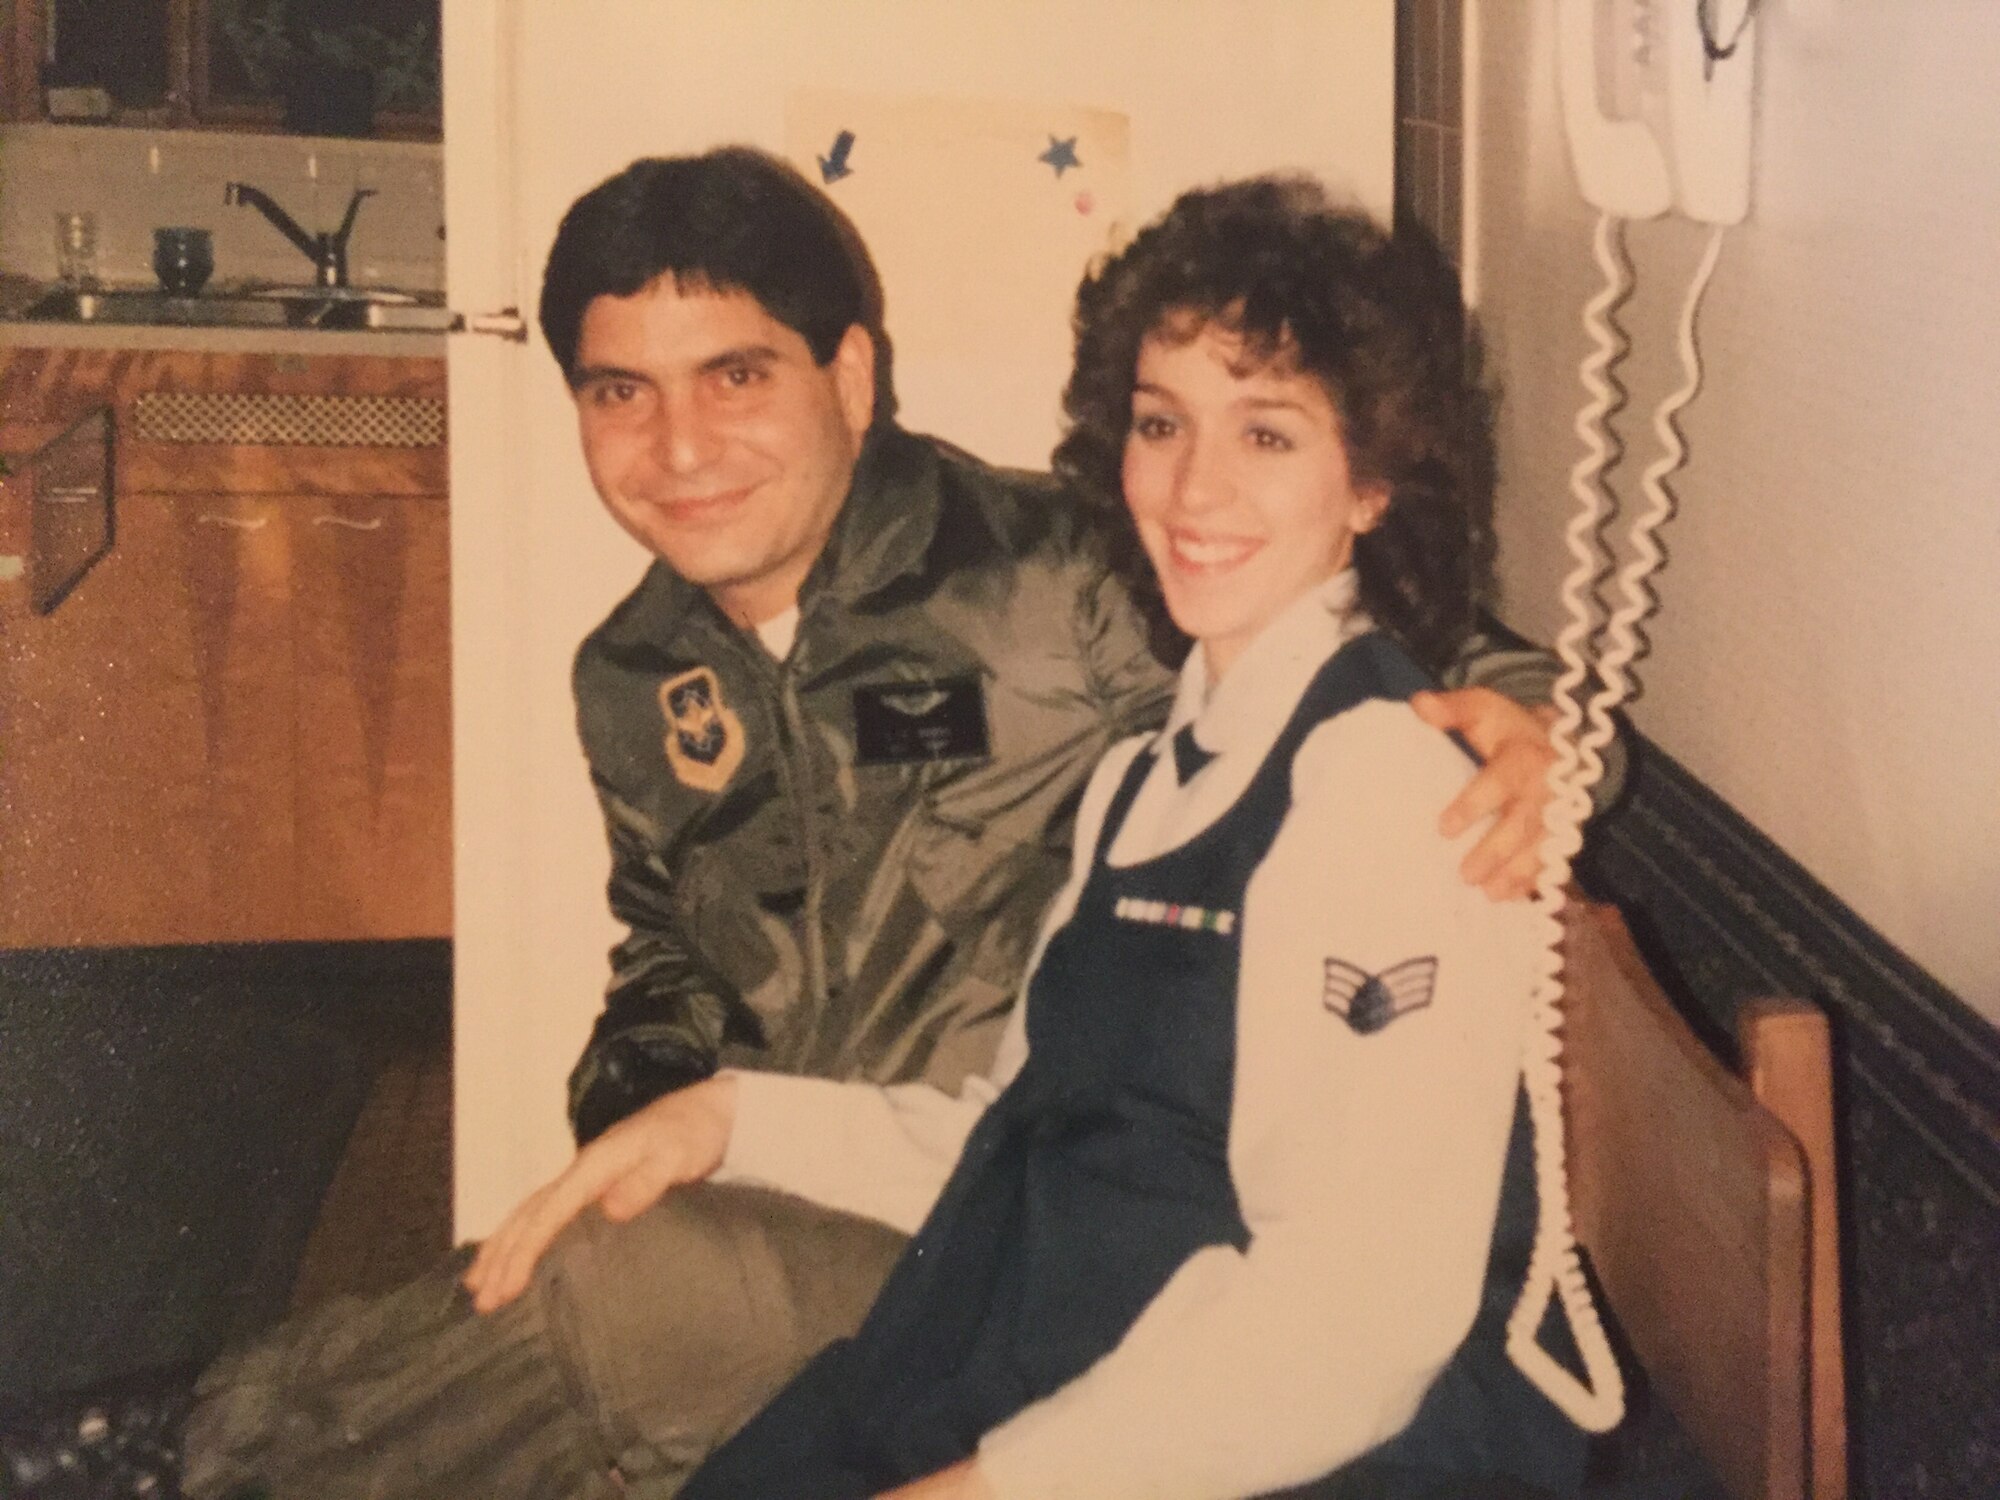 Carmen and Anna Marie Russo, both prior-enlisted Air Force members, pose for a photo circa 1985 in Sharon, Pennsylvania. Carmen and Anna Marie are the parents of Senior Airman Christina Russo, a public affairs specialist with the 910th Airlift Wing. Carmen Russo was a loadmaster with the 757th Airlift Squadron, and Anna Marie Russo was the administrative assistant to the 910th AW commander.